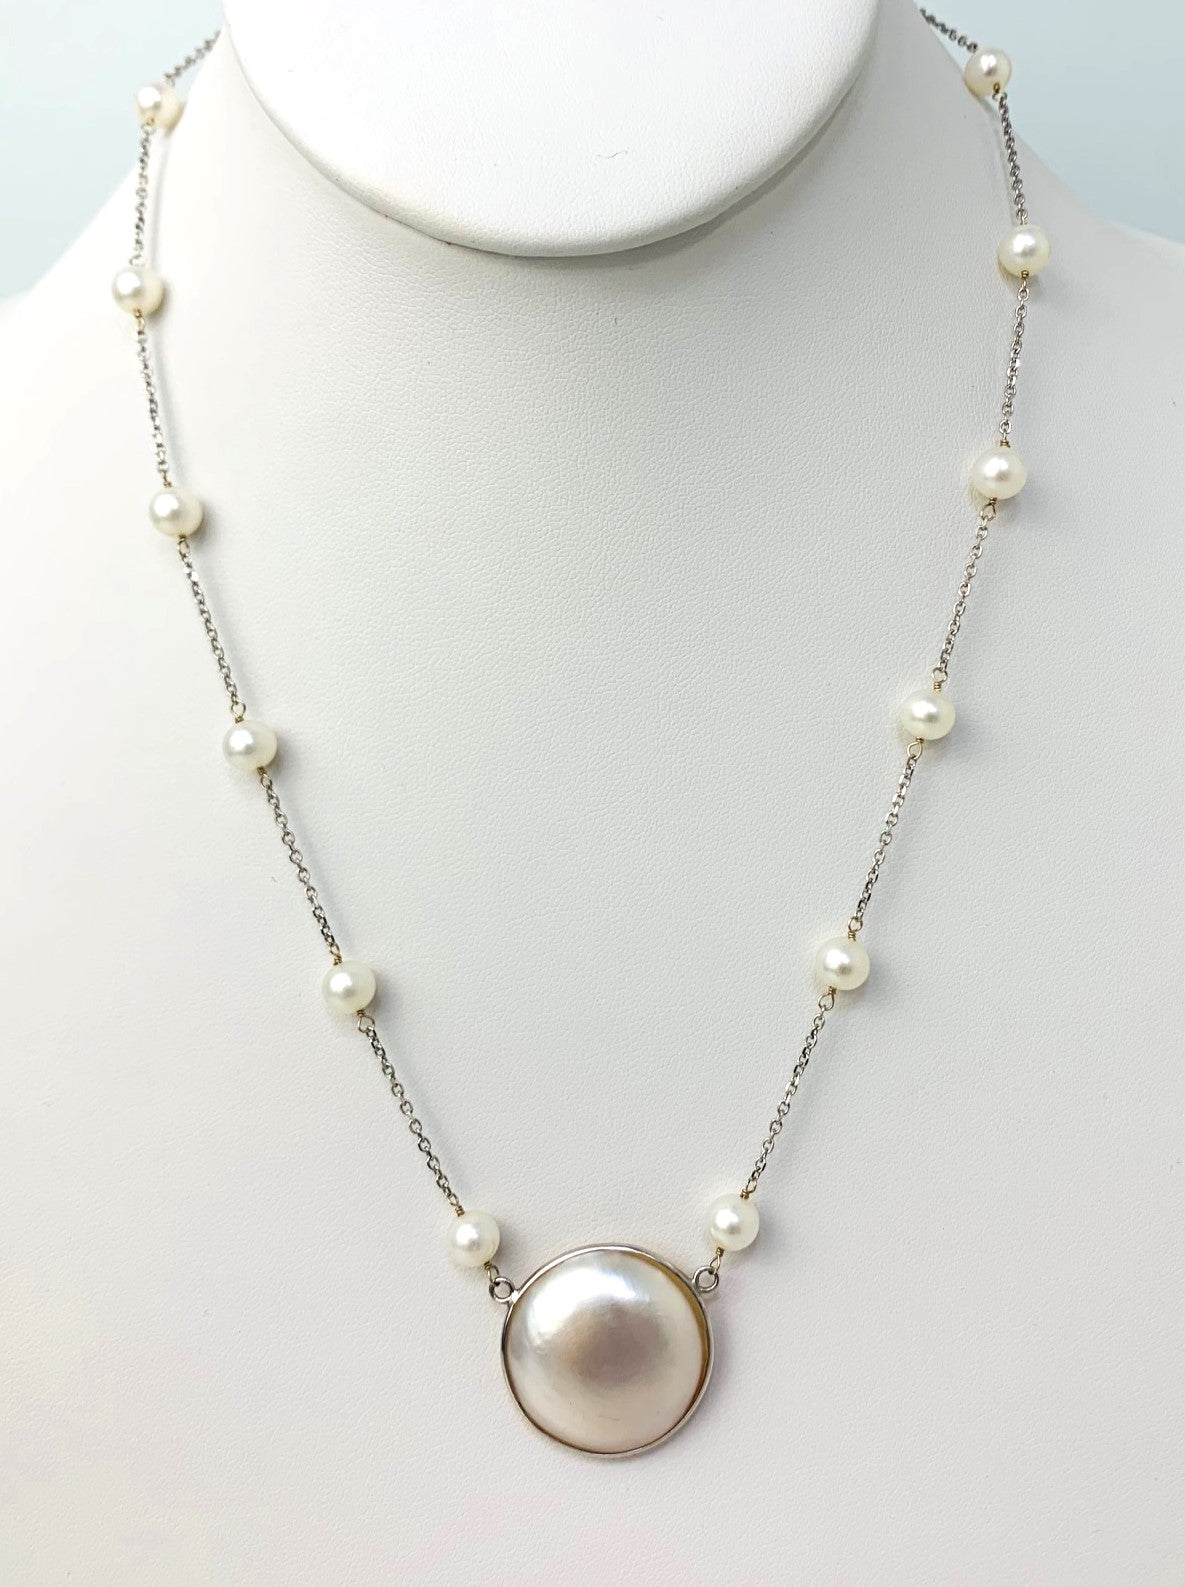 18" Pearl Station Necklace With Mabe Pearl Center in 14KW - NCK-210-TNCPRL14KW-WH-18